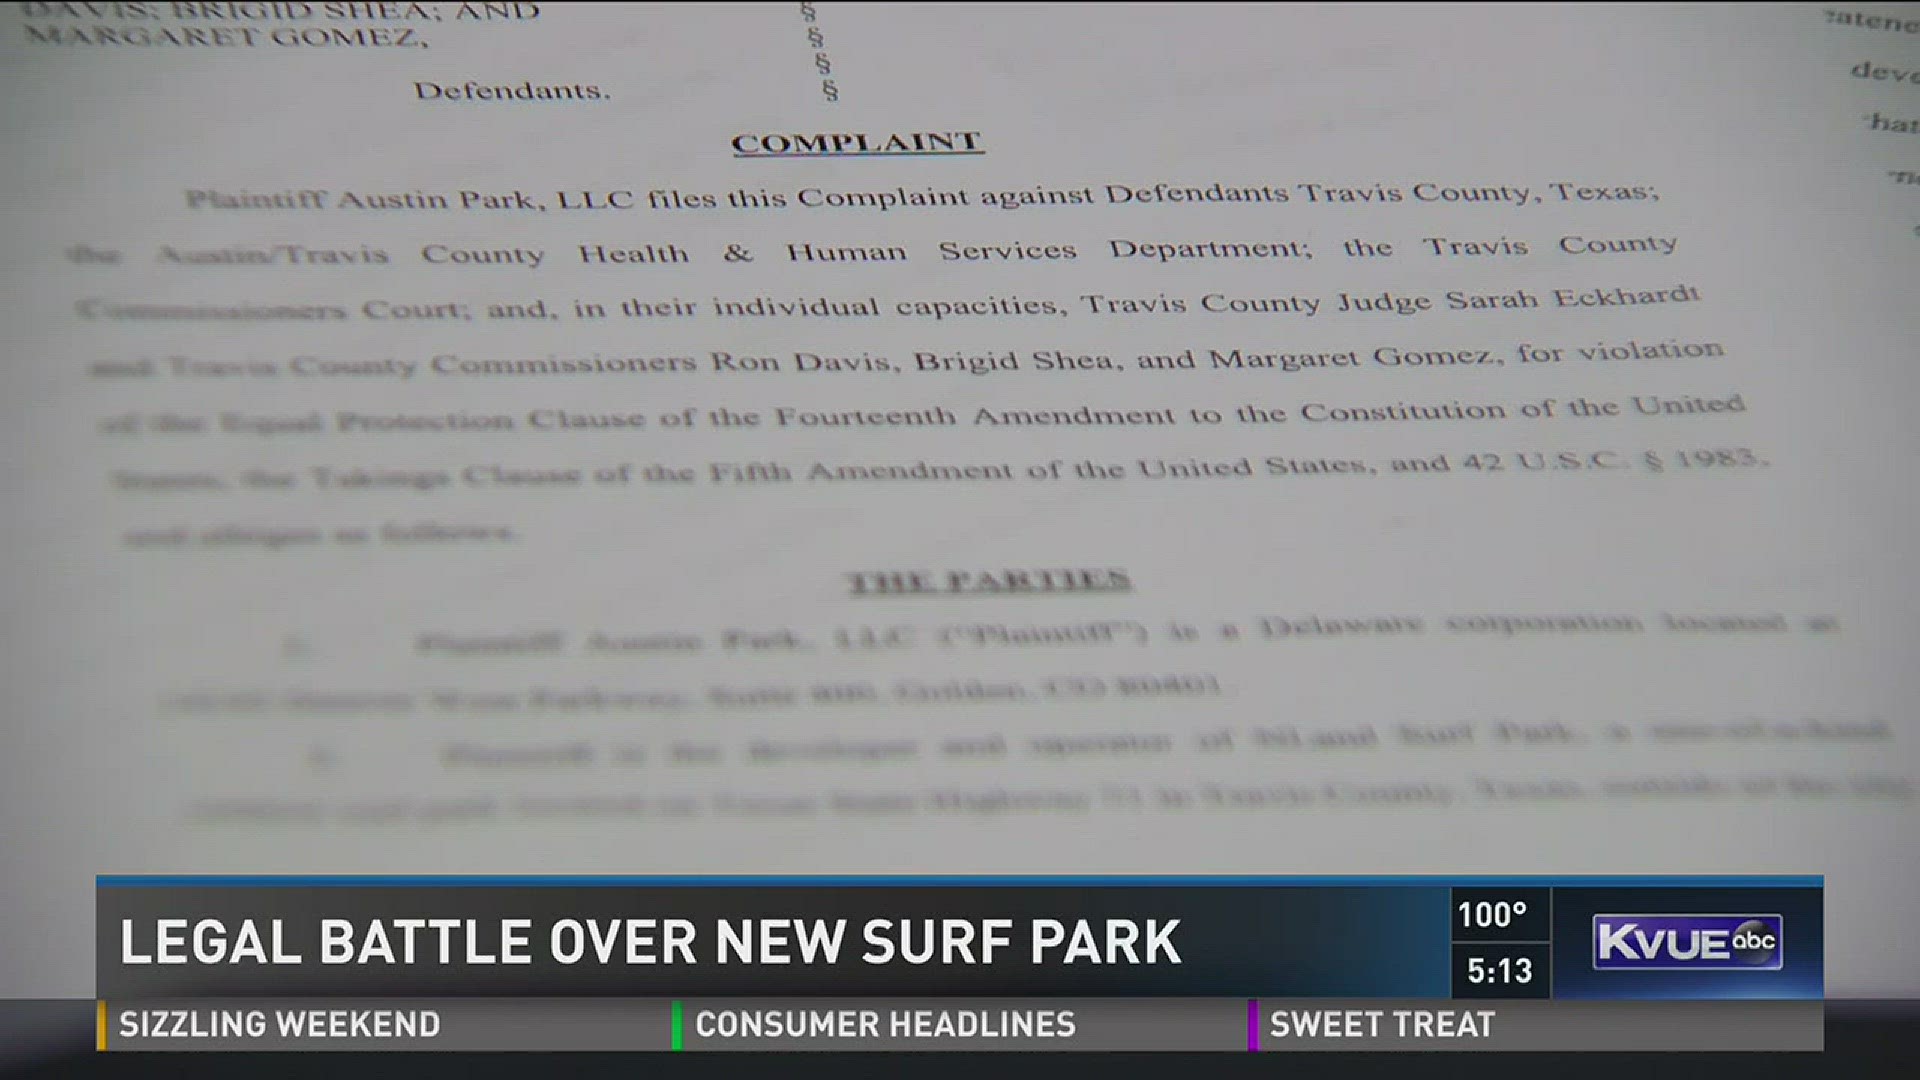 A legal battle over health and safety issues between a Central Texas Surf Park and Travis County -- with both sides filing lawsuits against the other.